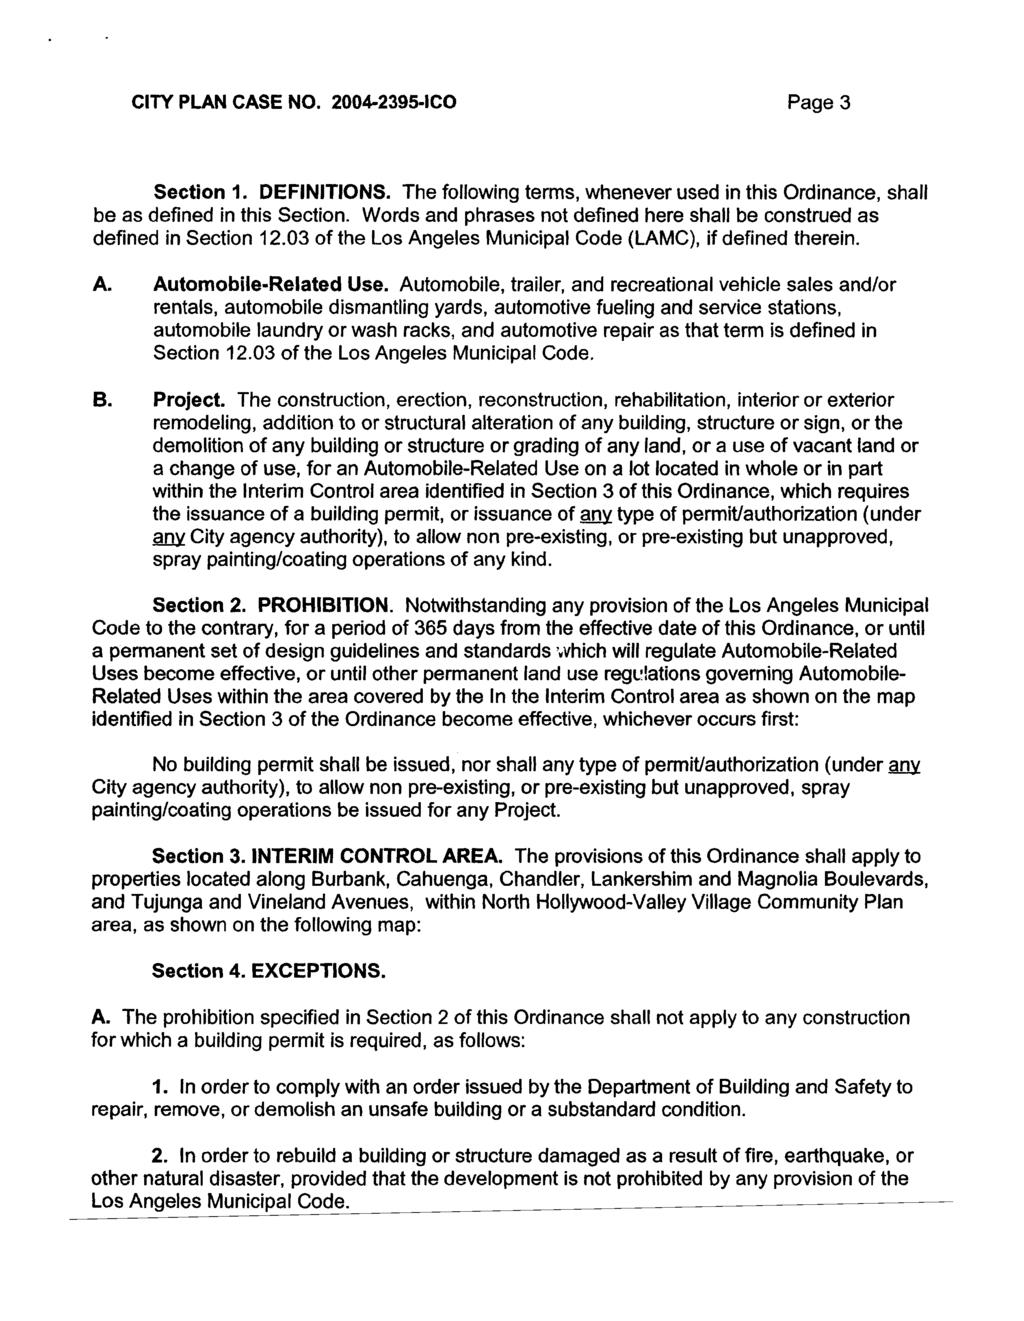 CITY PLAN CASE NO. 2004-2395-ICO Page 3 Section I. DEFINITIONS. The following terms, whenever used in this Ordinance, shall be as defined in this Section.